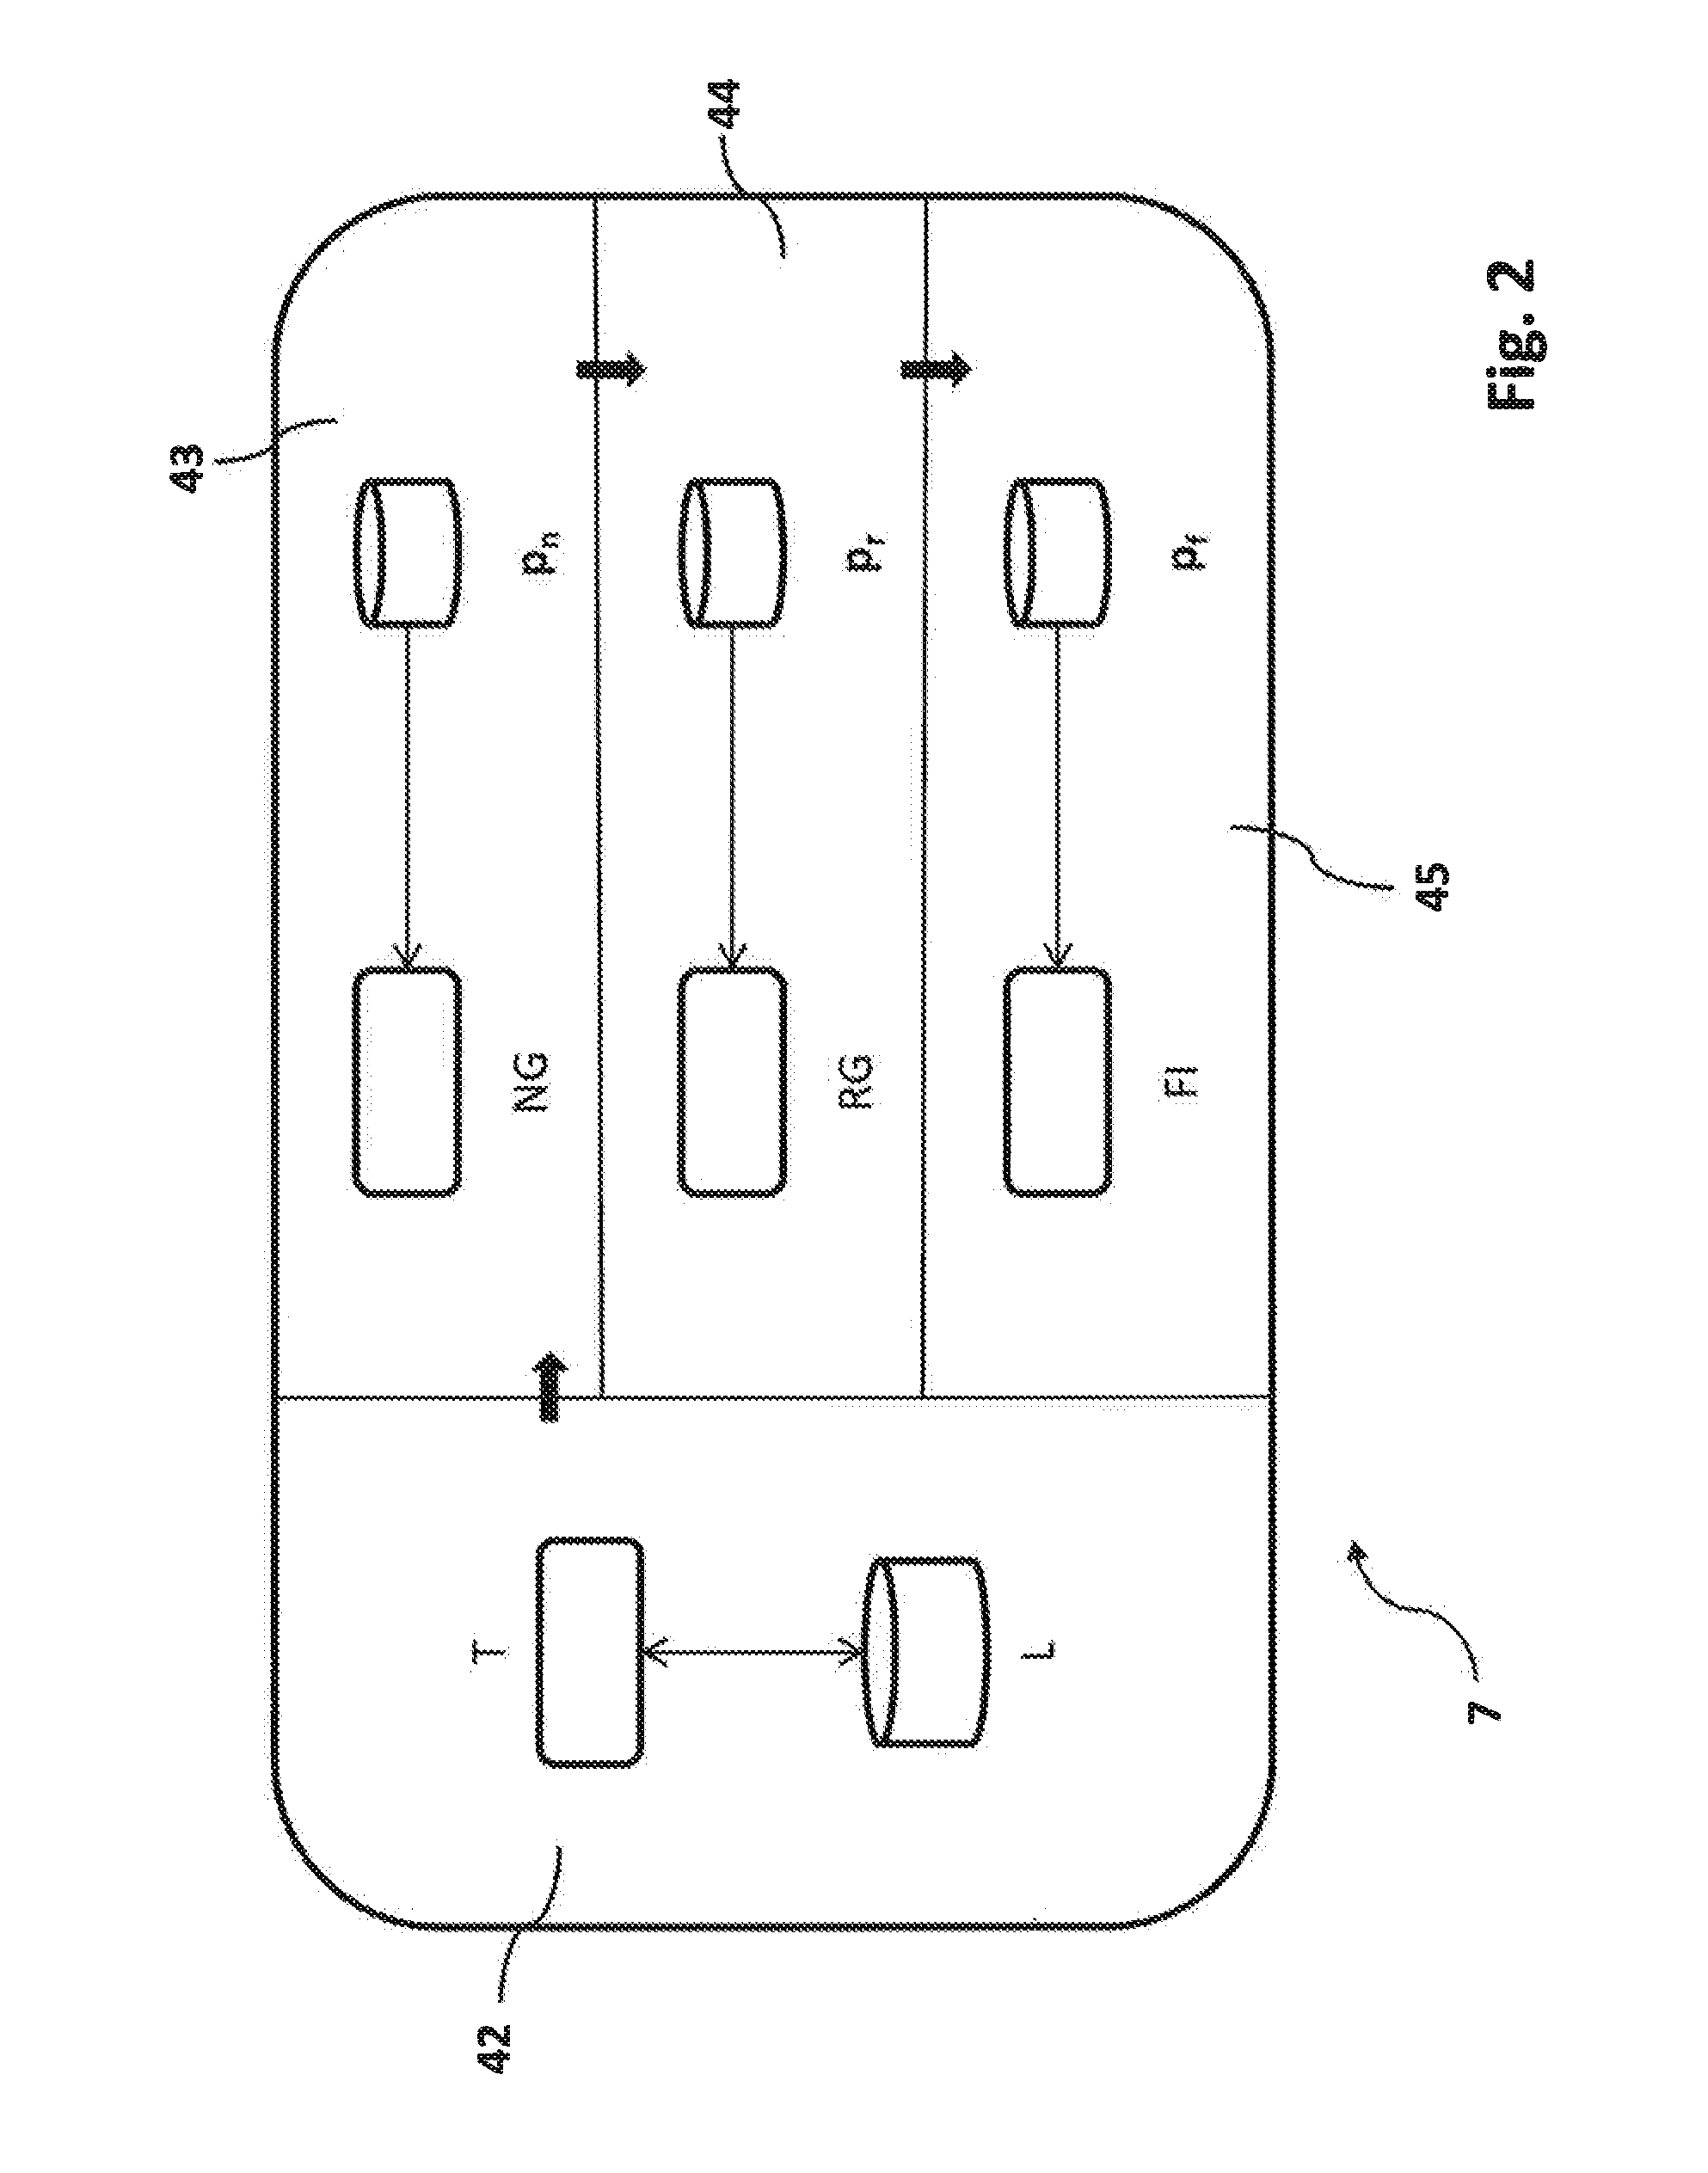 Method and Device for Performing Natural Language Searches